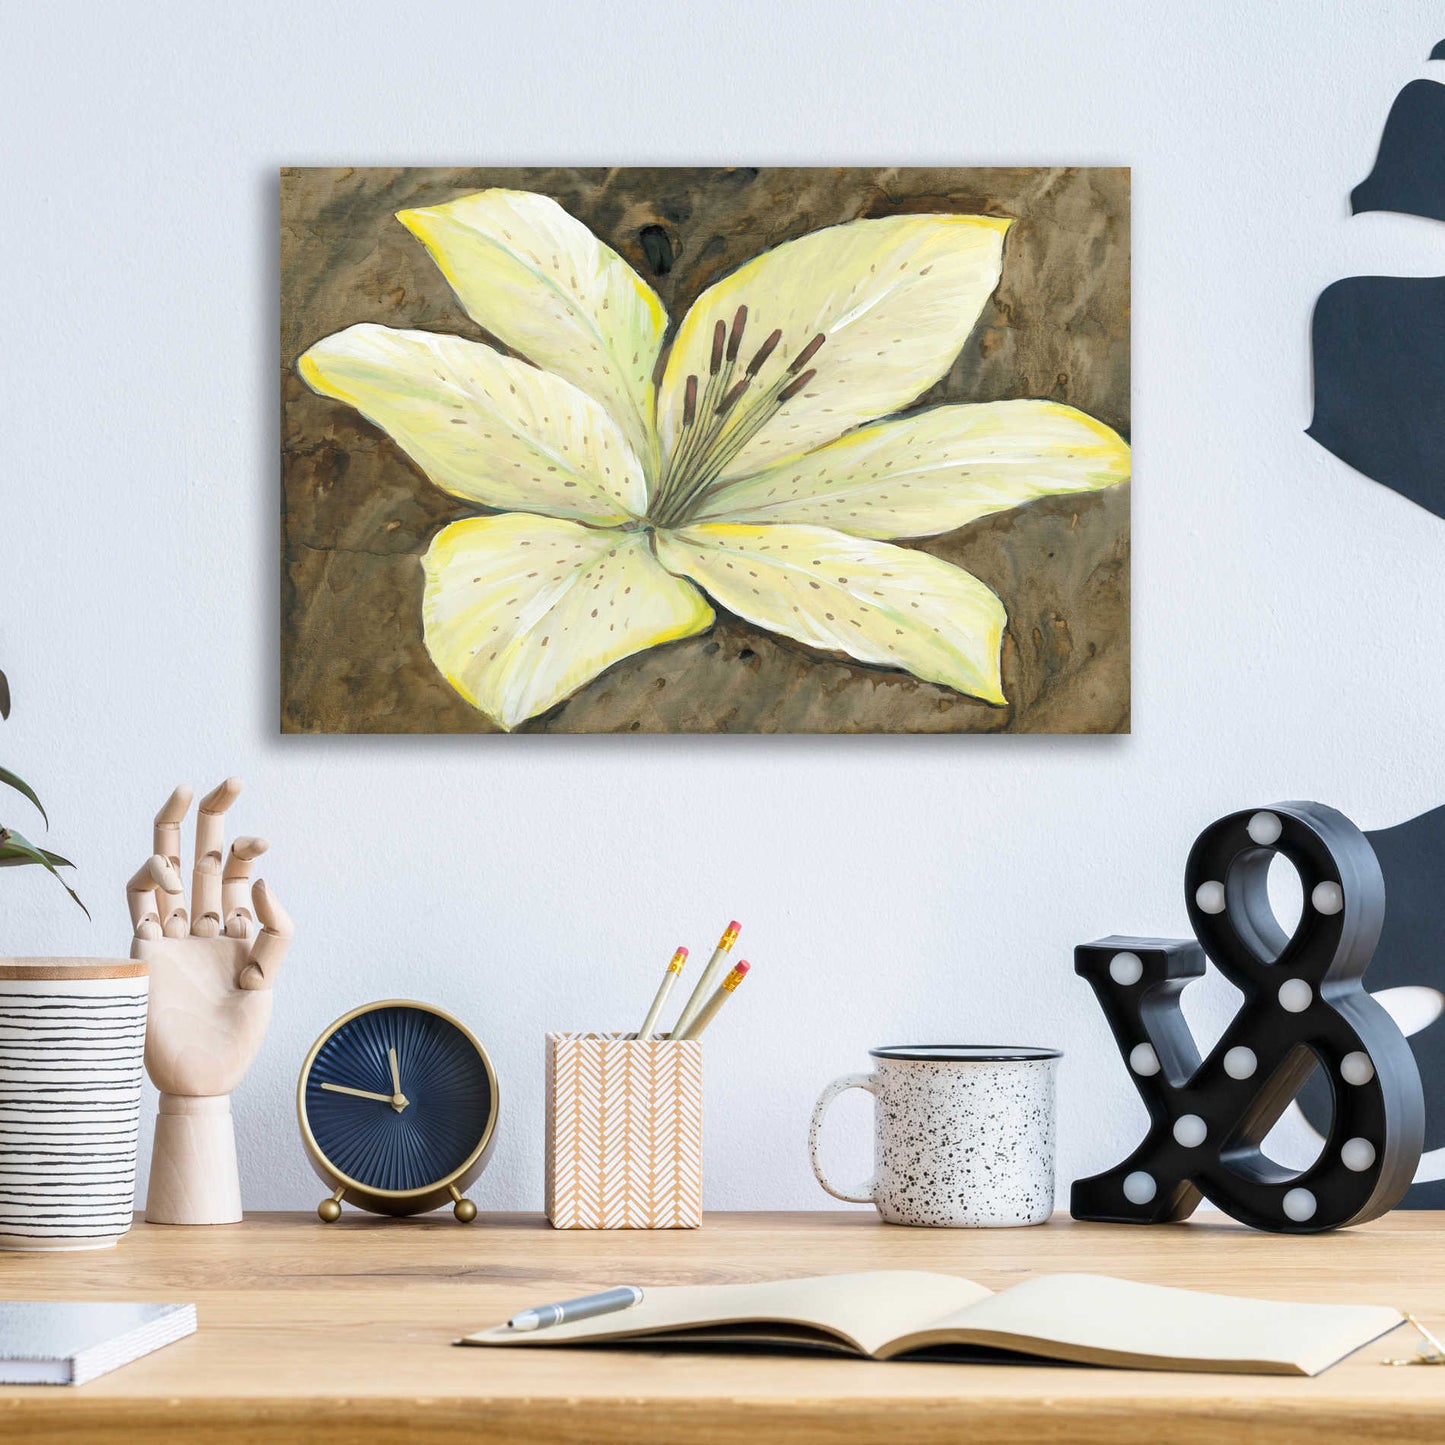 Epic Art 'Neutral Lily I' by Tim O'Toole, Acrylic Glass Wall Art,16x12